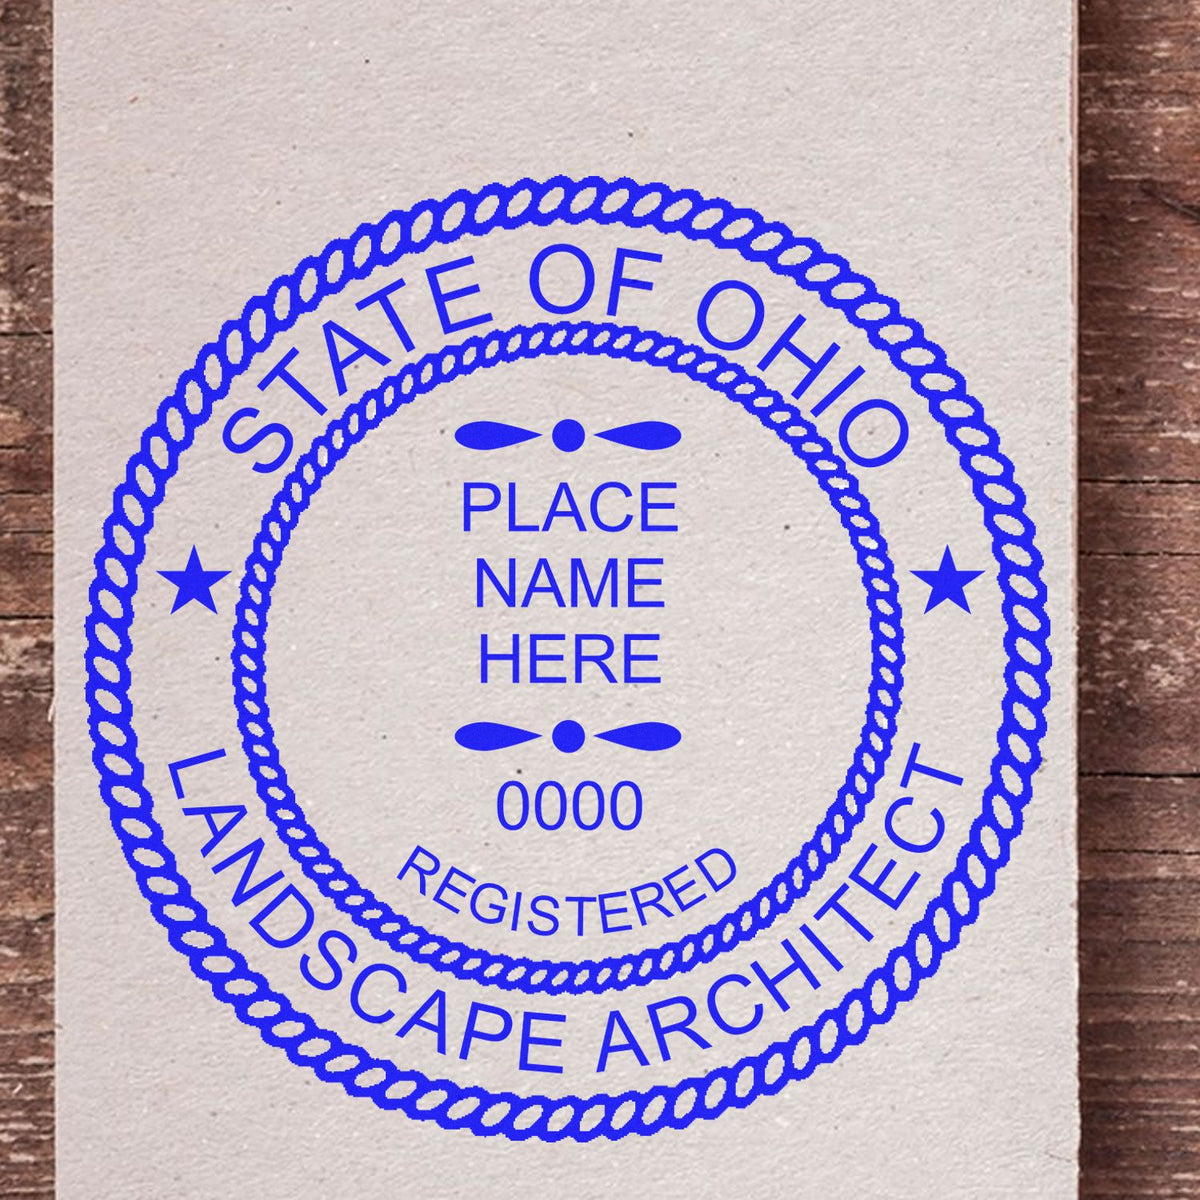 The Slim Pre-Inked Ohio Landscape Architect Seal Stamp stamp impression comes to life with a crisp, detailed photo on paper - showcasing true professional quality.